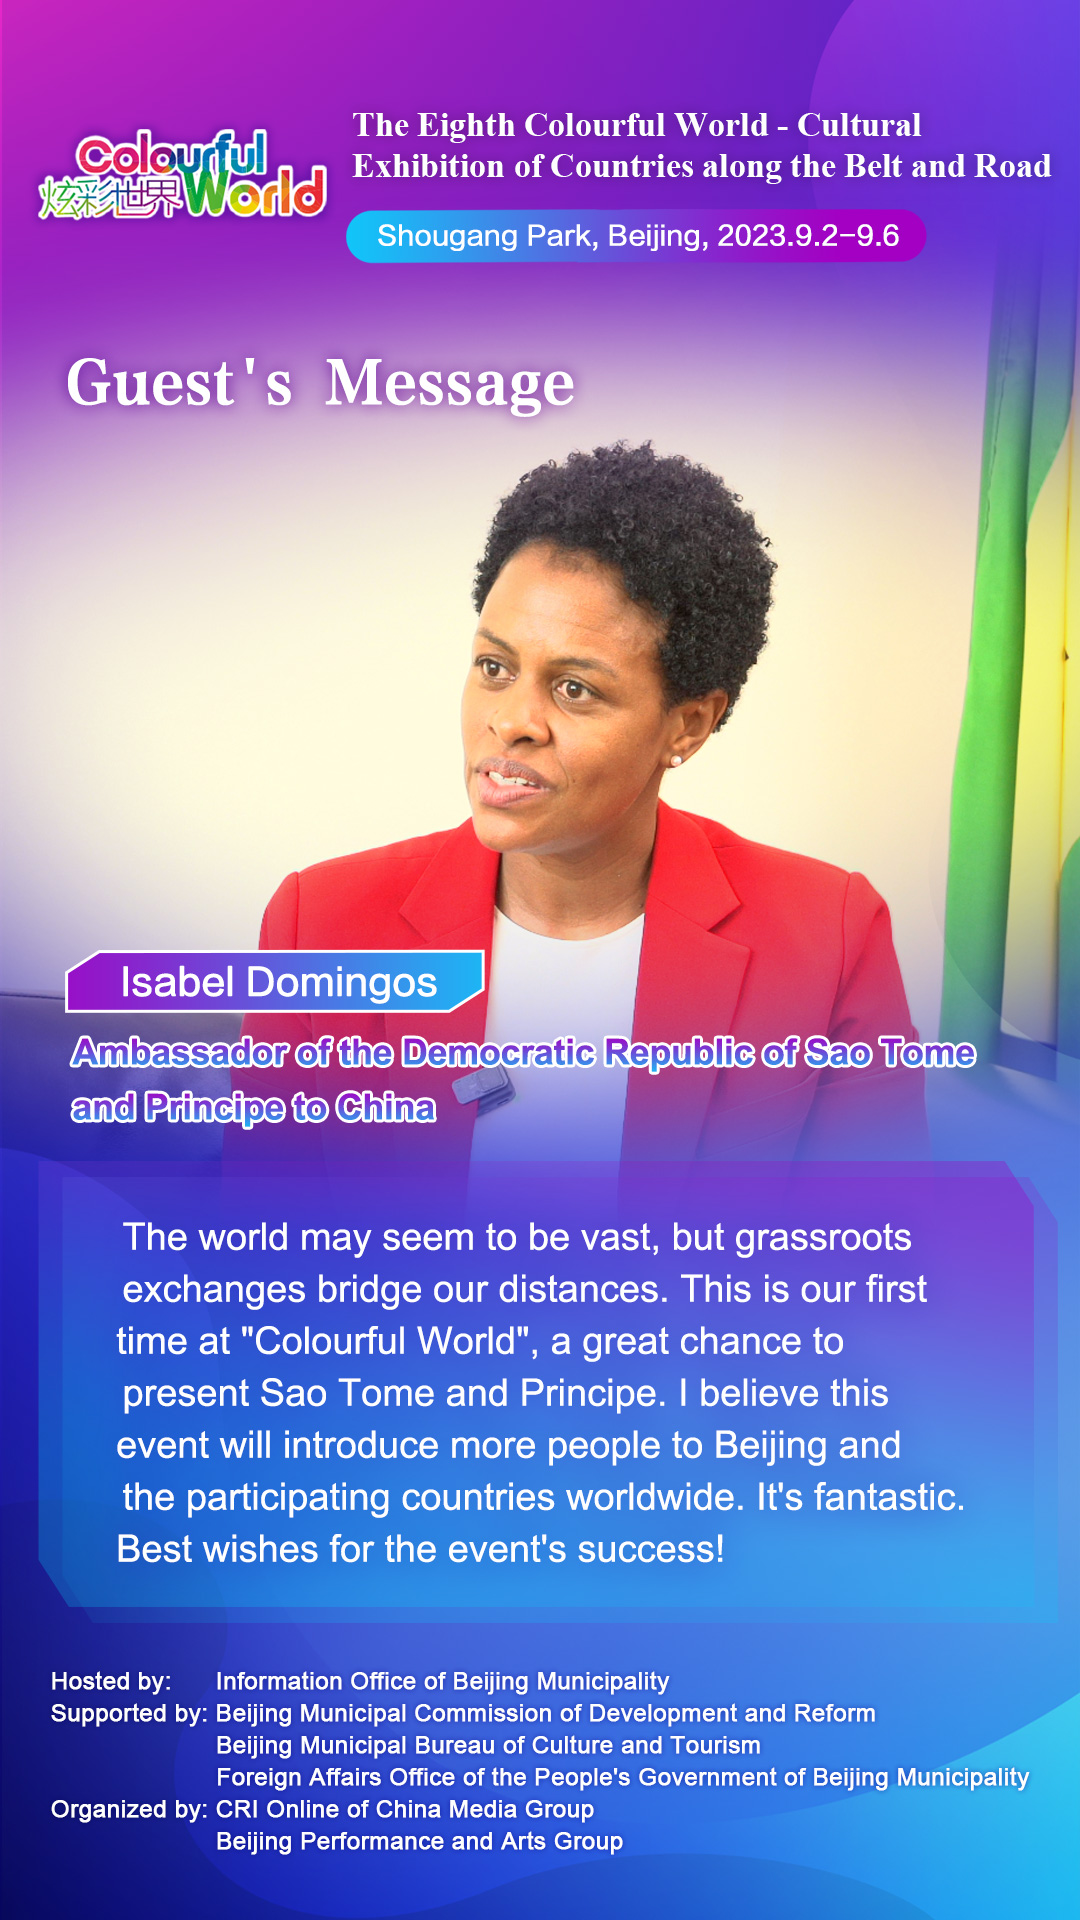 Guest’s Message - Isabel Domingos, Ambassador of the Democratic Republic of Sao Tome and Principe to China_fororder_第八届“炫彩世界”-金句海报-English-圣多美和普林西比(1)